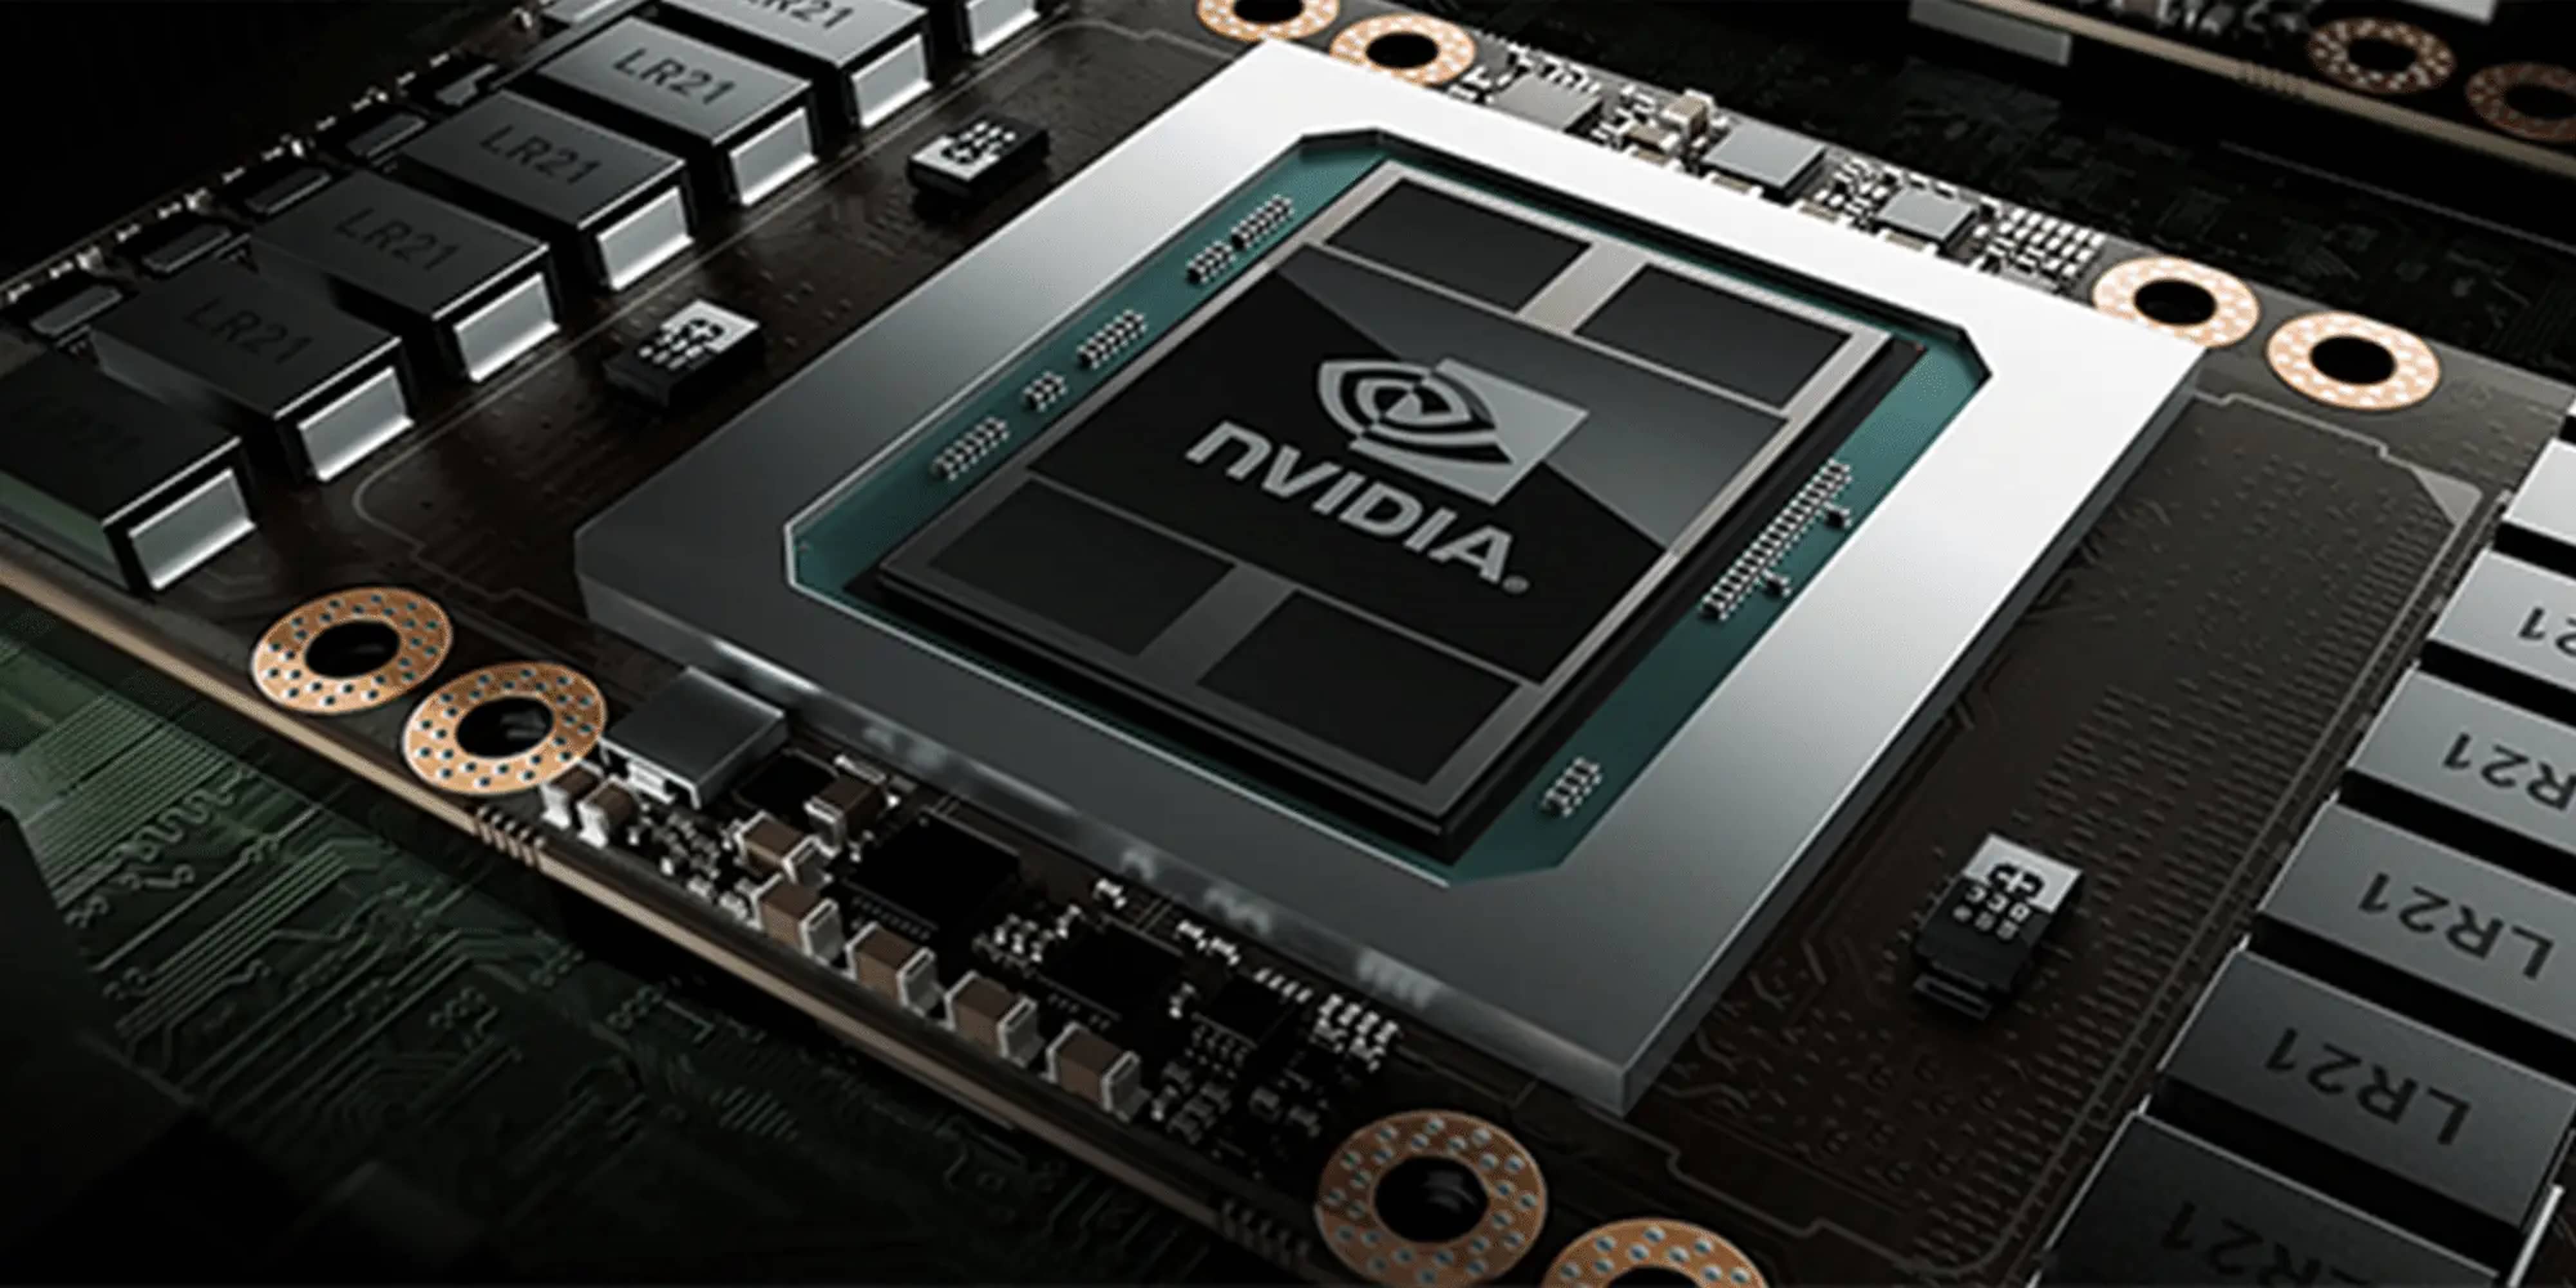 Nvidia Offers Processor for Chinese Market That Meets US Controls